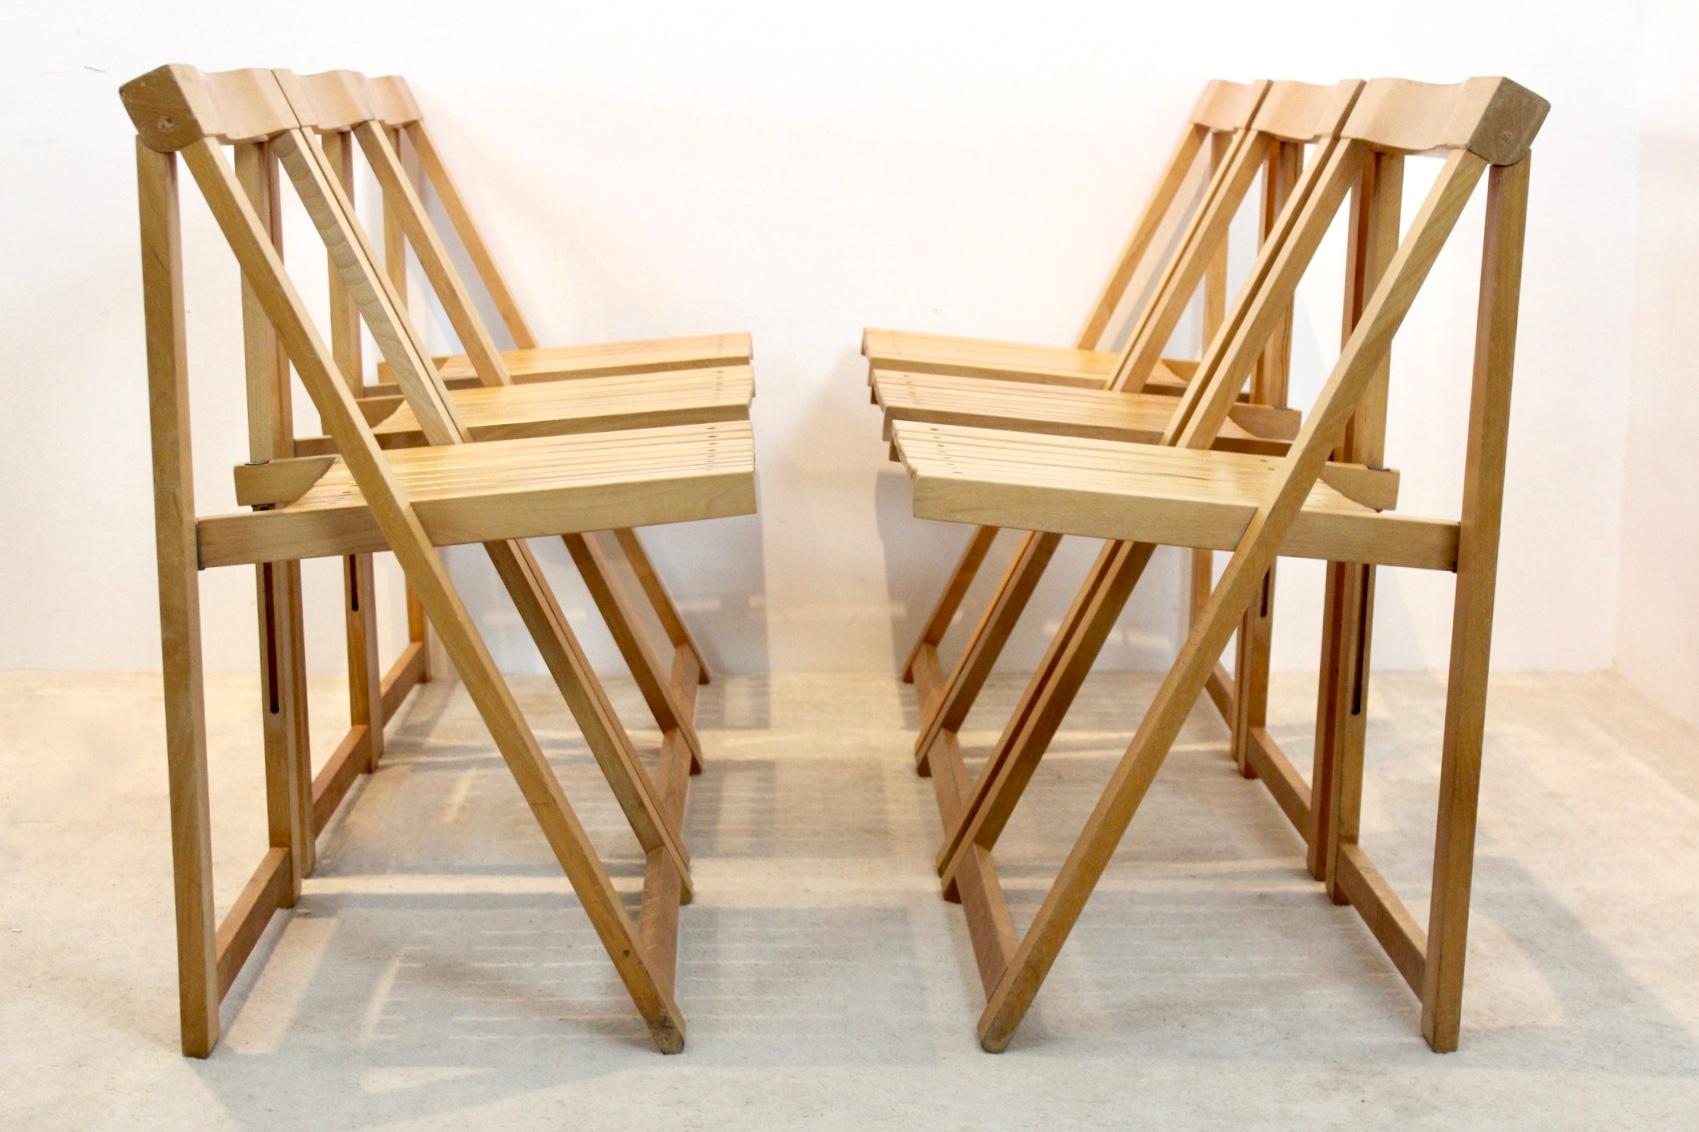 Comfortable folding chairs designed by Aldo Jacober for Alberto Bazzani. We have 40 pieces available. The chairs are made of Beechwood and have a very solid frame and a great sit. All in good condition with some user marks and beautiful patina